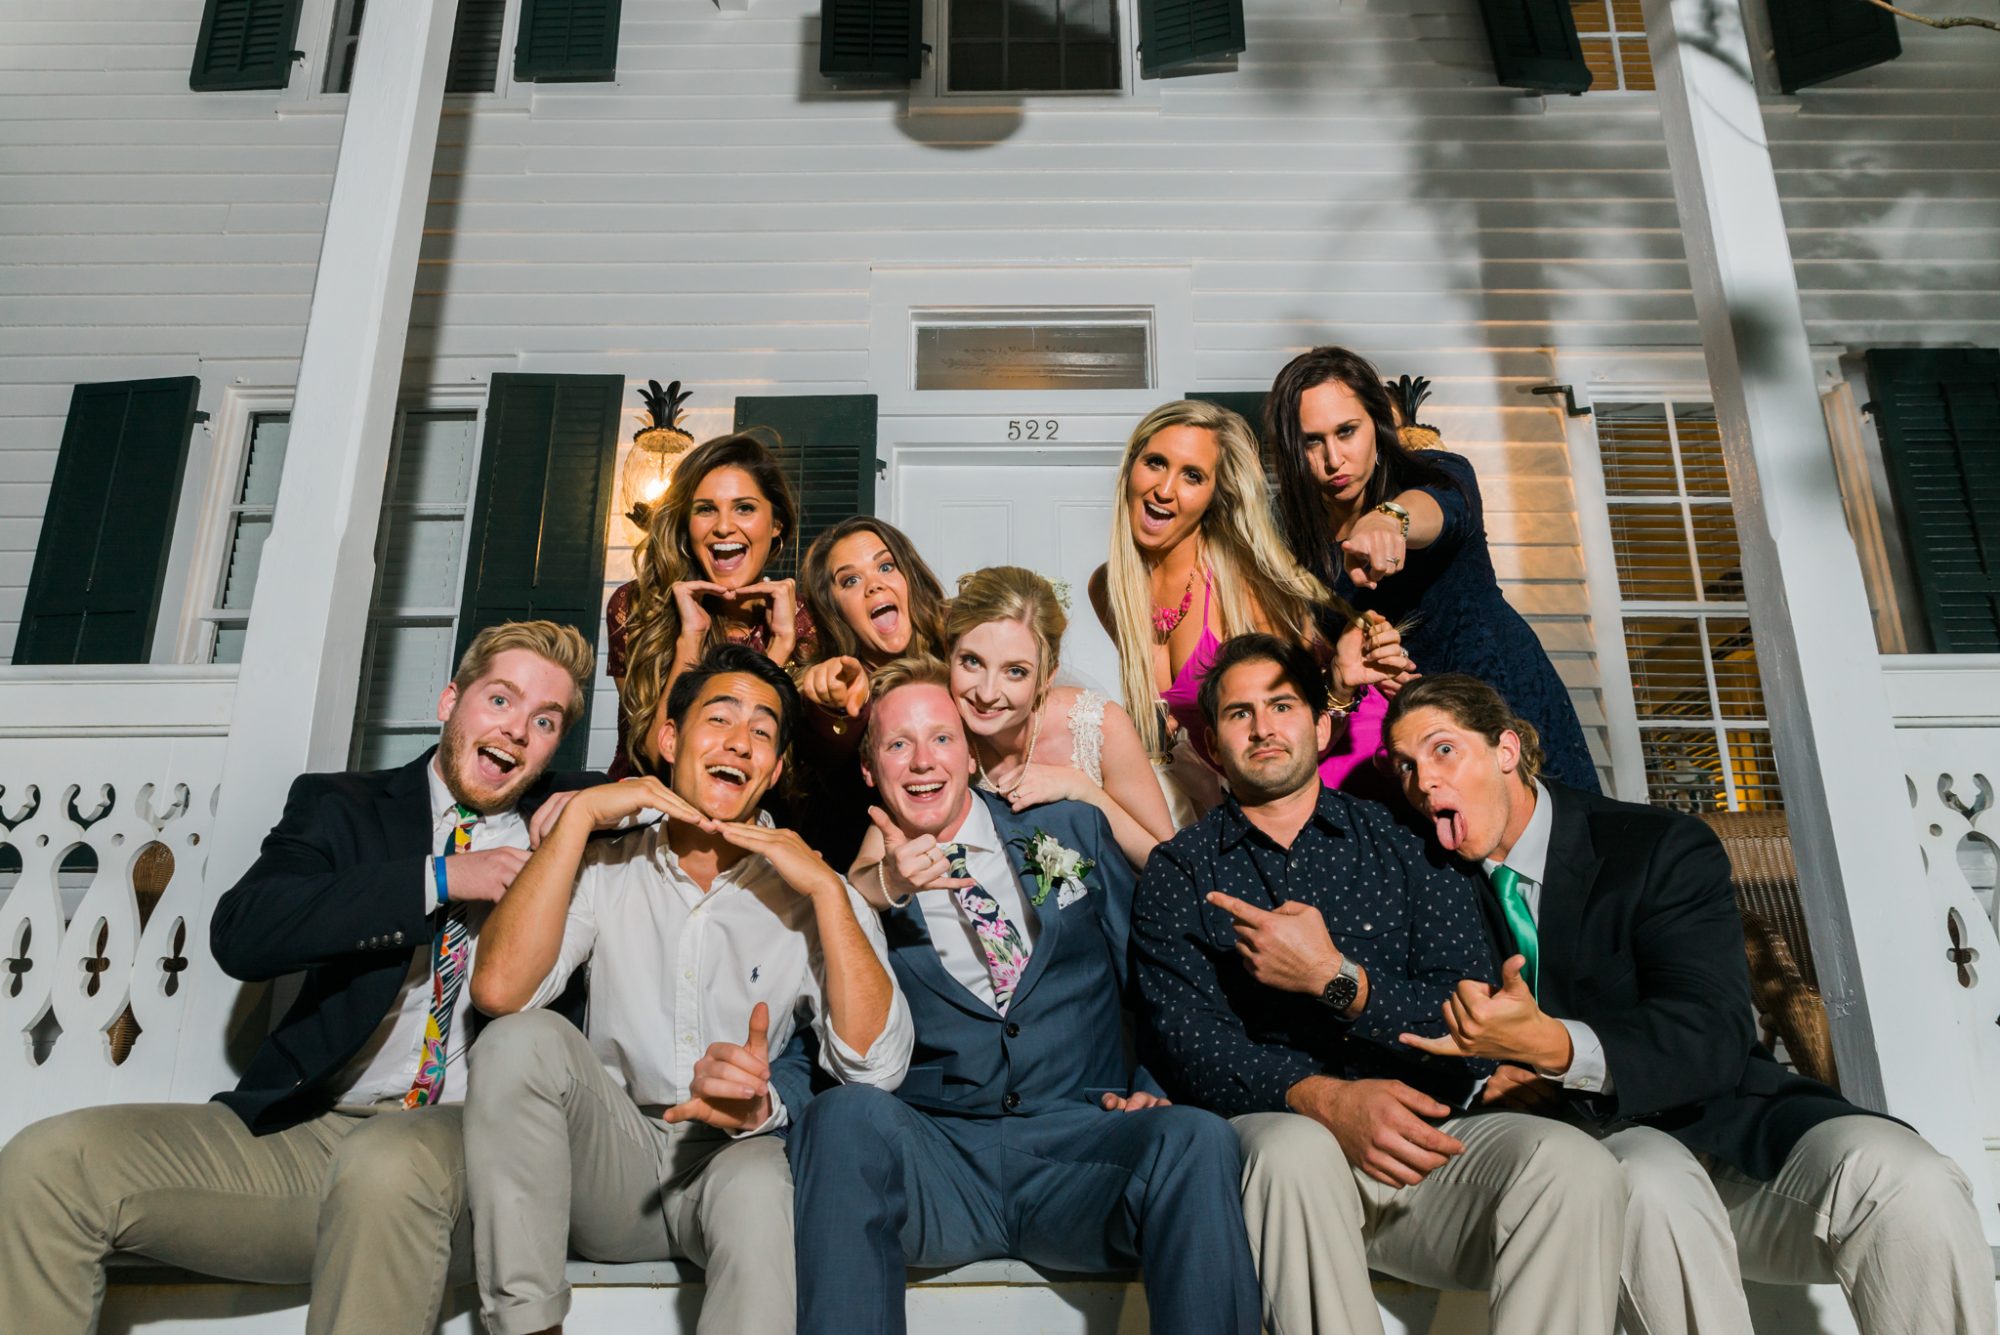 A group of people posing for a photo in front of a house during a sailing themed key west wedding.